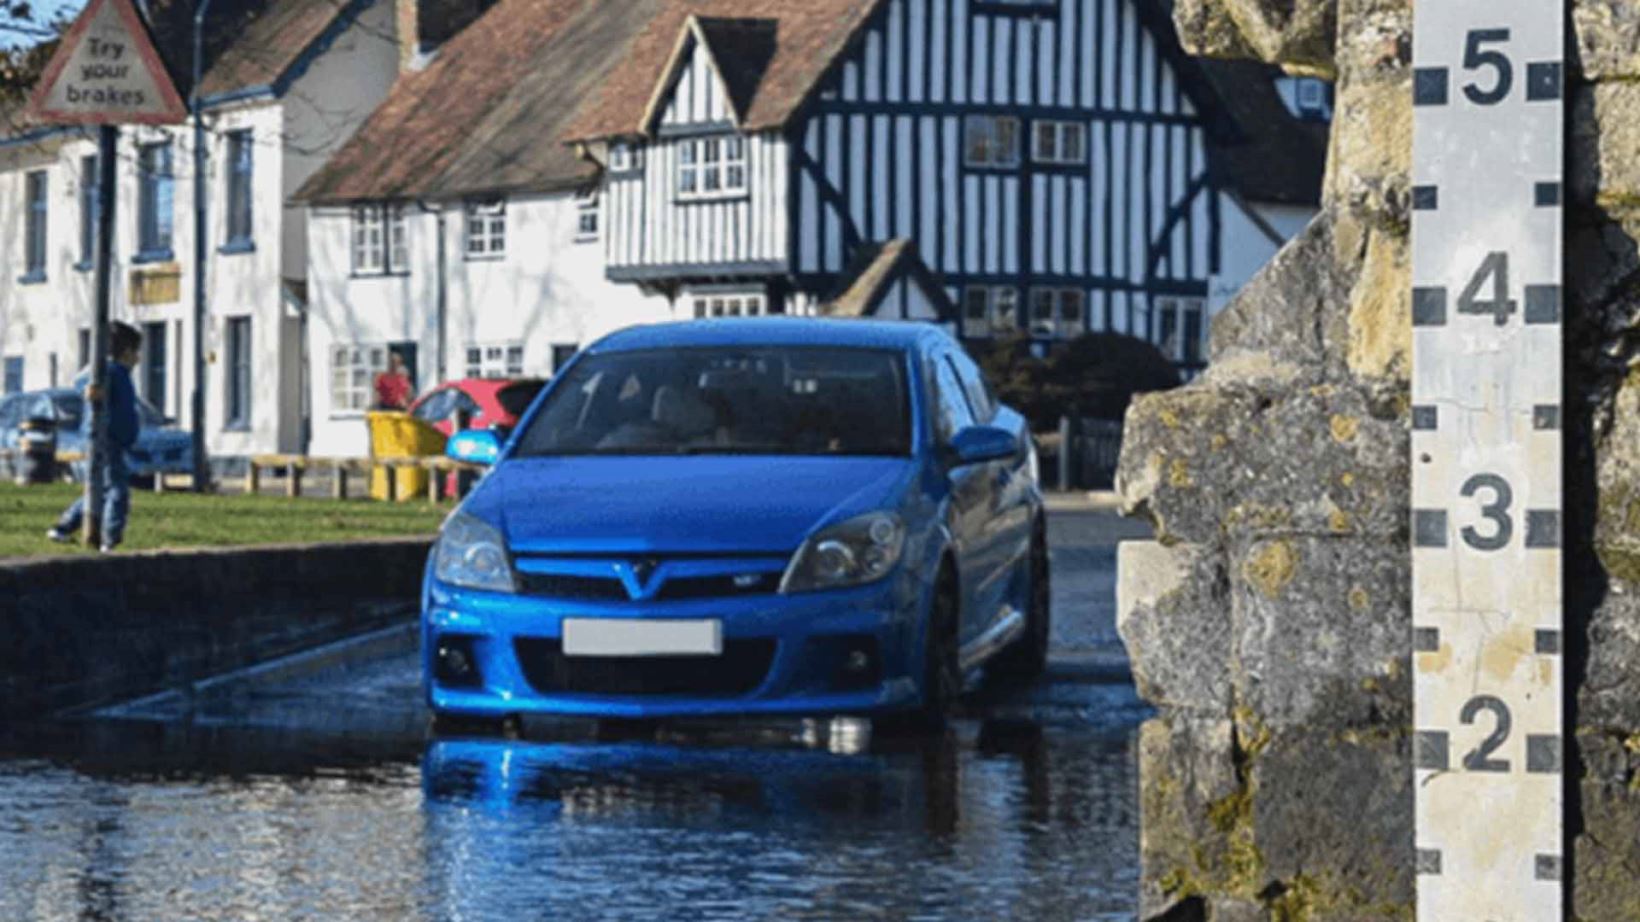 images/pages/modified-car-of-the-year-emilys-vauxhall-astra-h-vxr-feature_1640.jpg